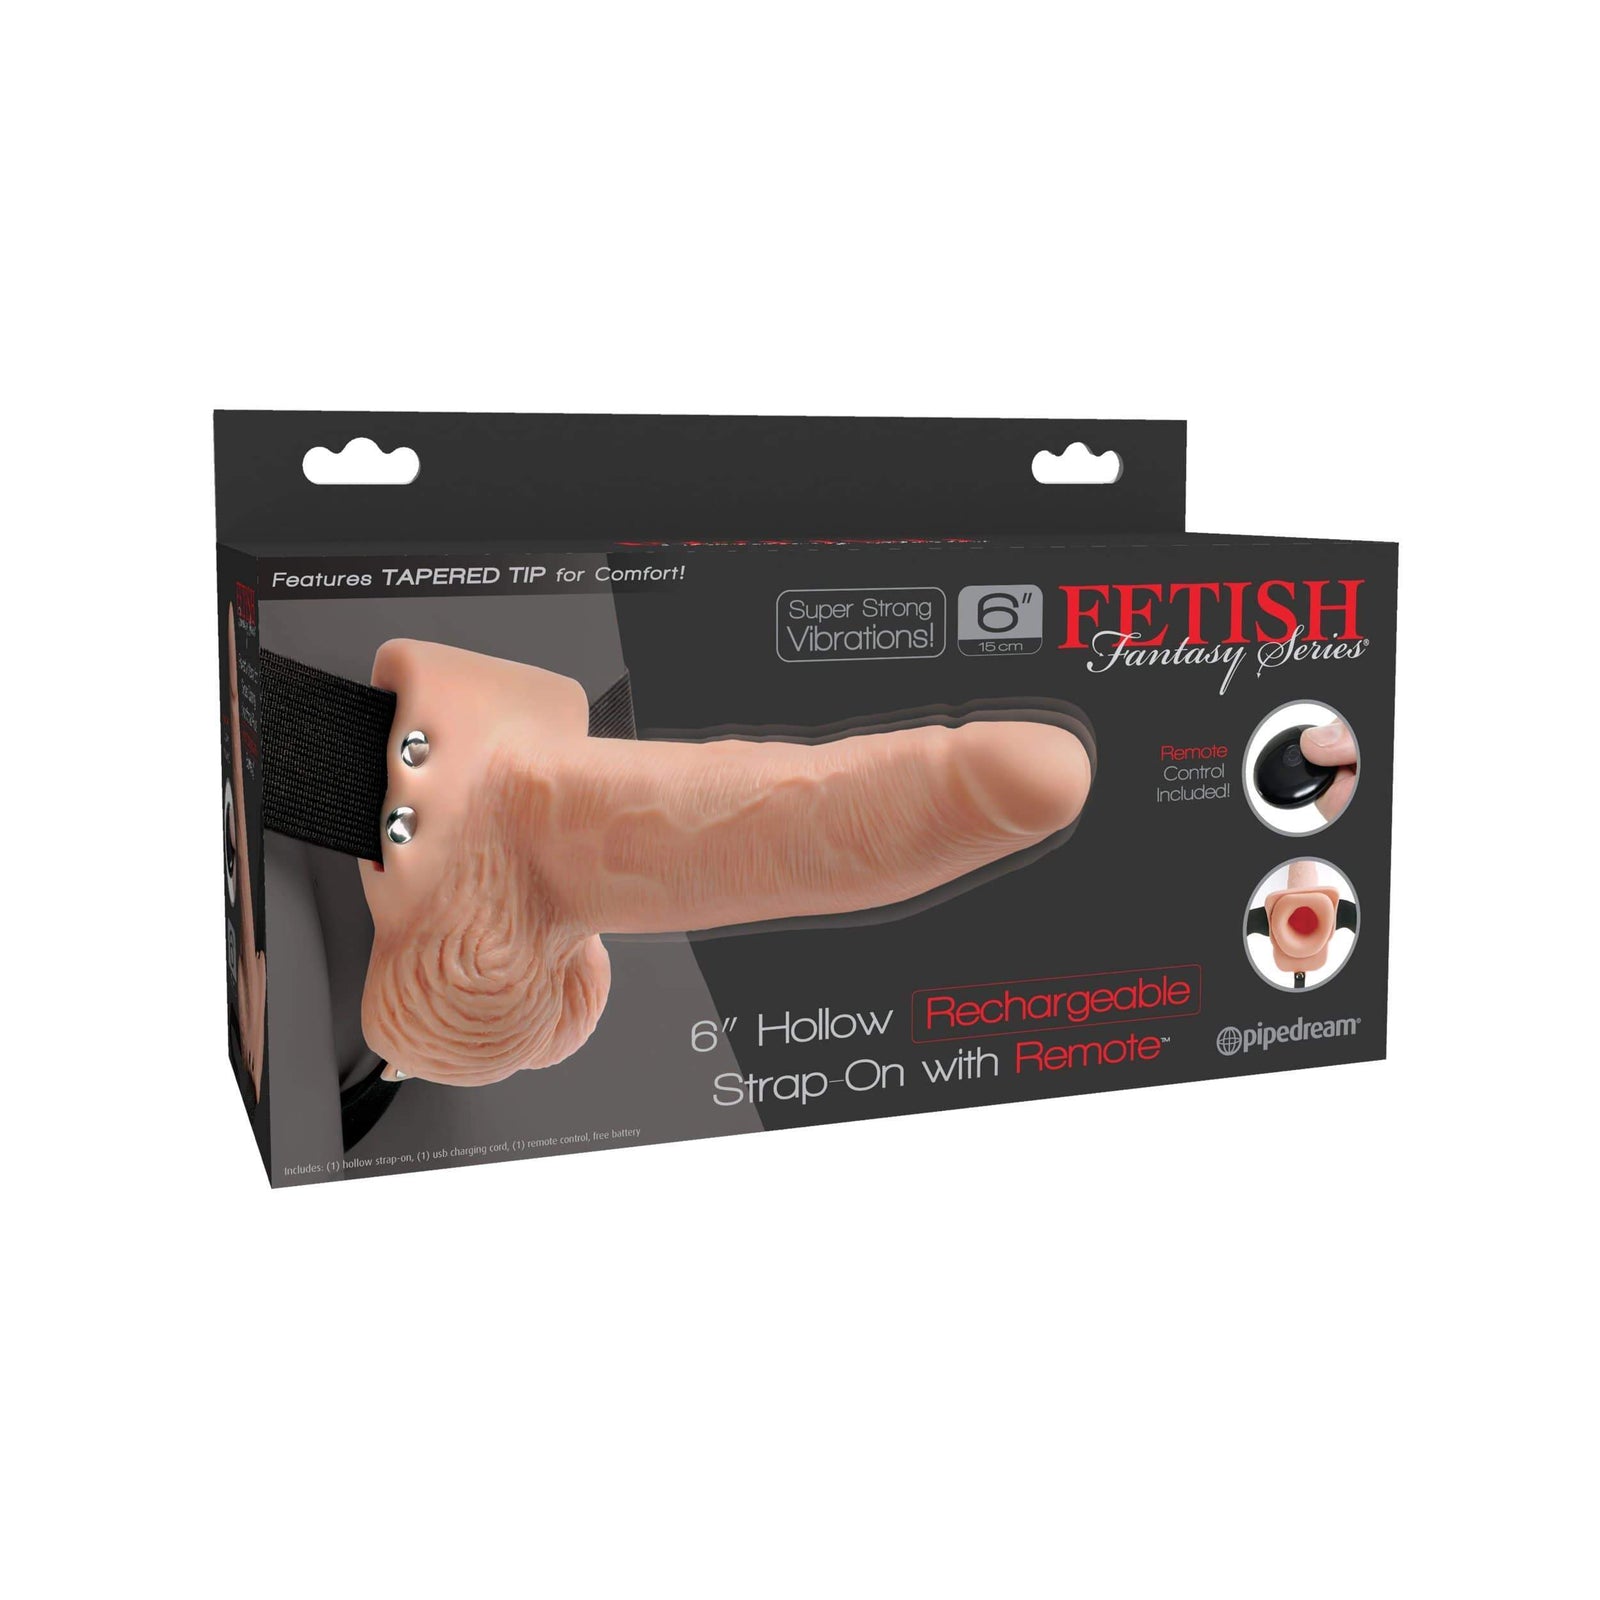 Pipedream - Fetish Fantasy Hollow Rechargeable Strap On Remote 6" (Beige) Remote Control (Wireless) Strap On with Dildo for Reverse Insertion (Vibration) Rechargeable 603912759228 CherryAffairs